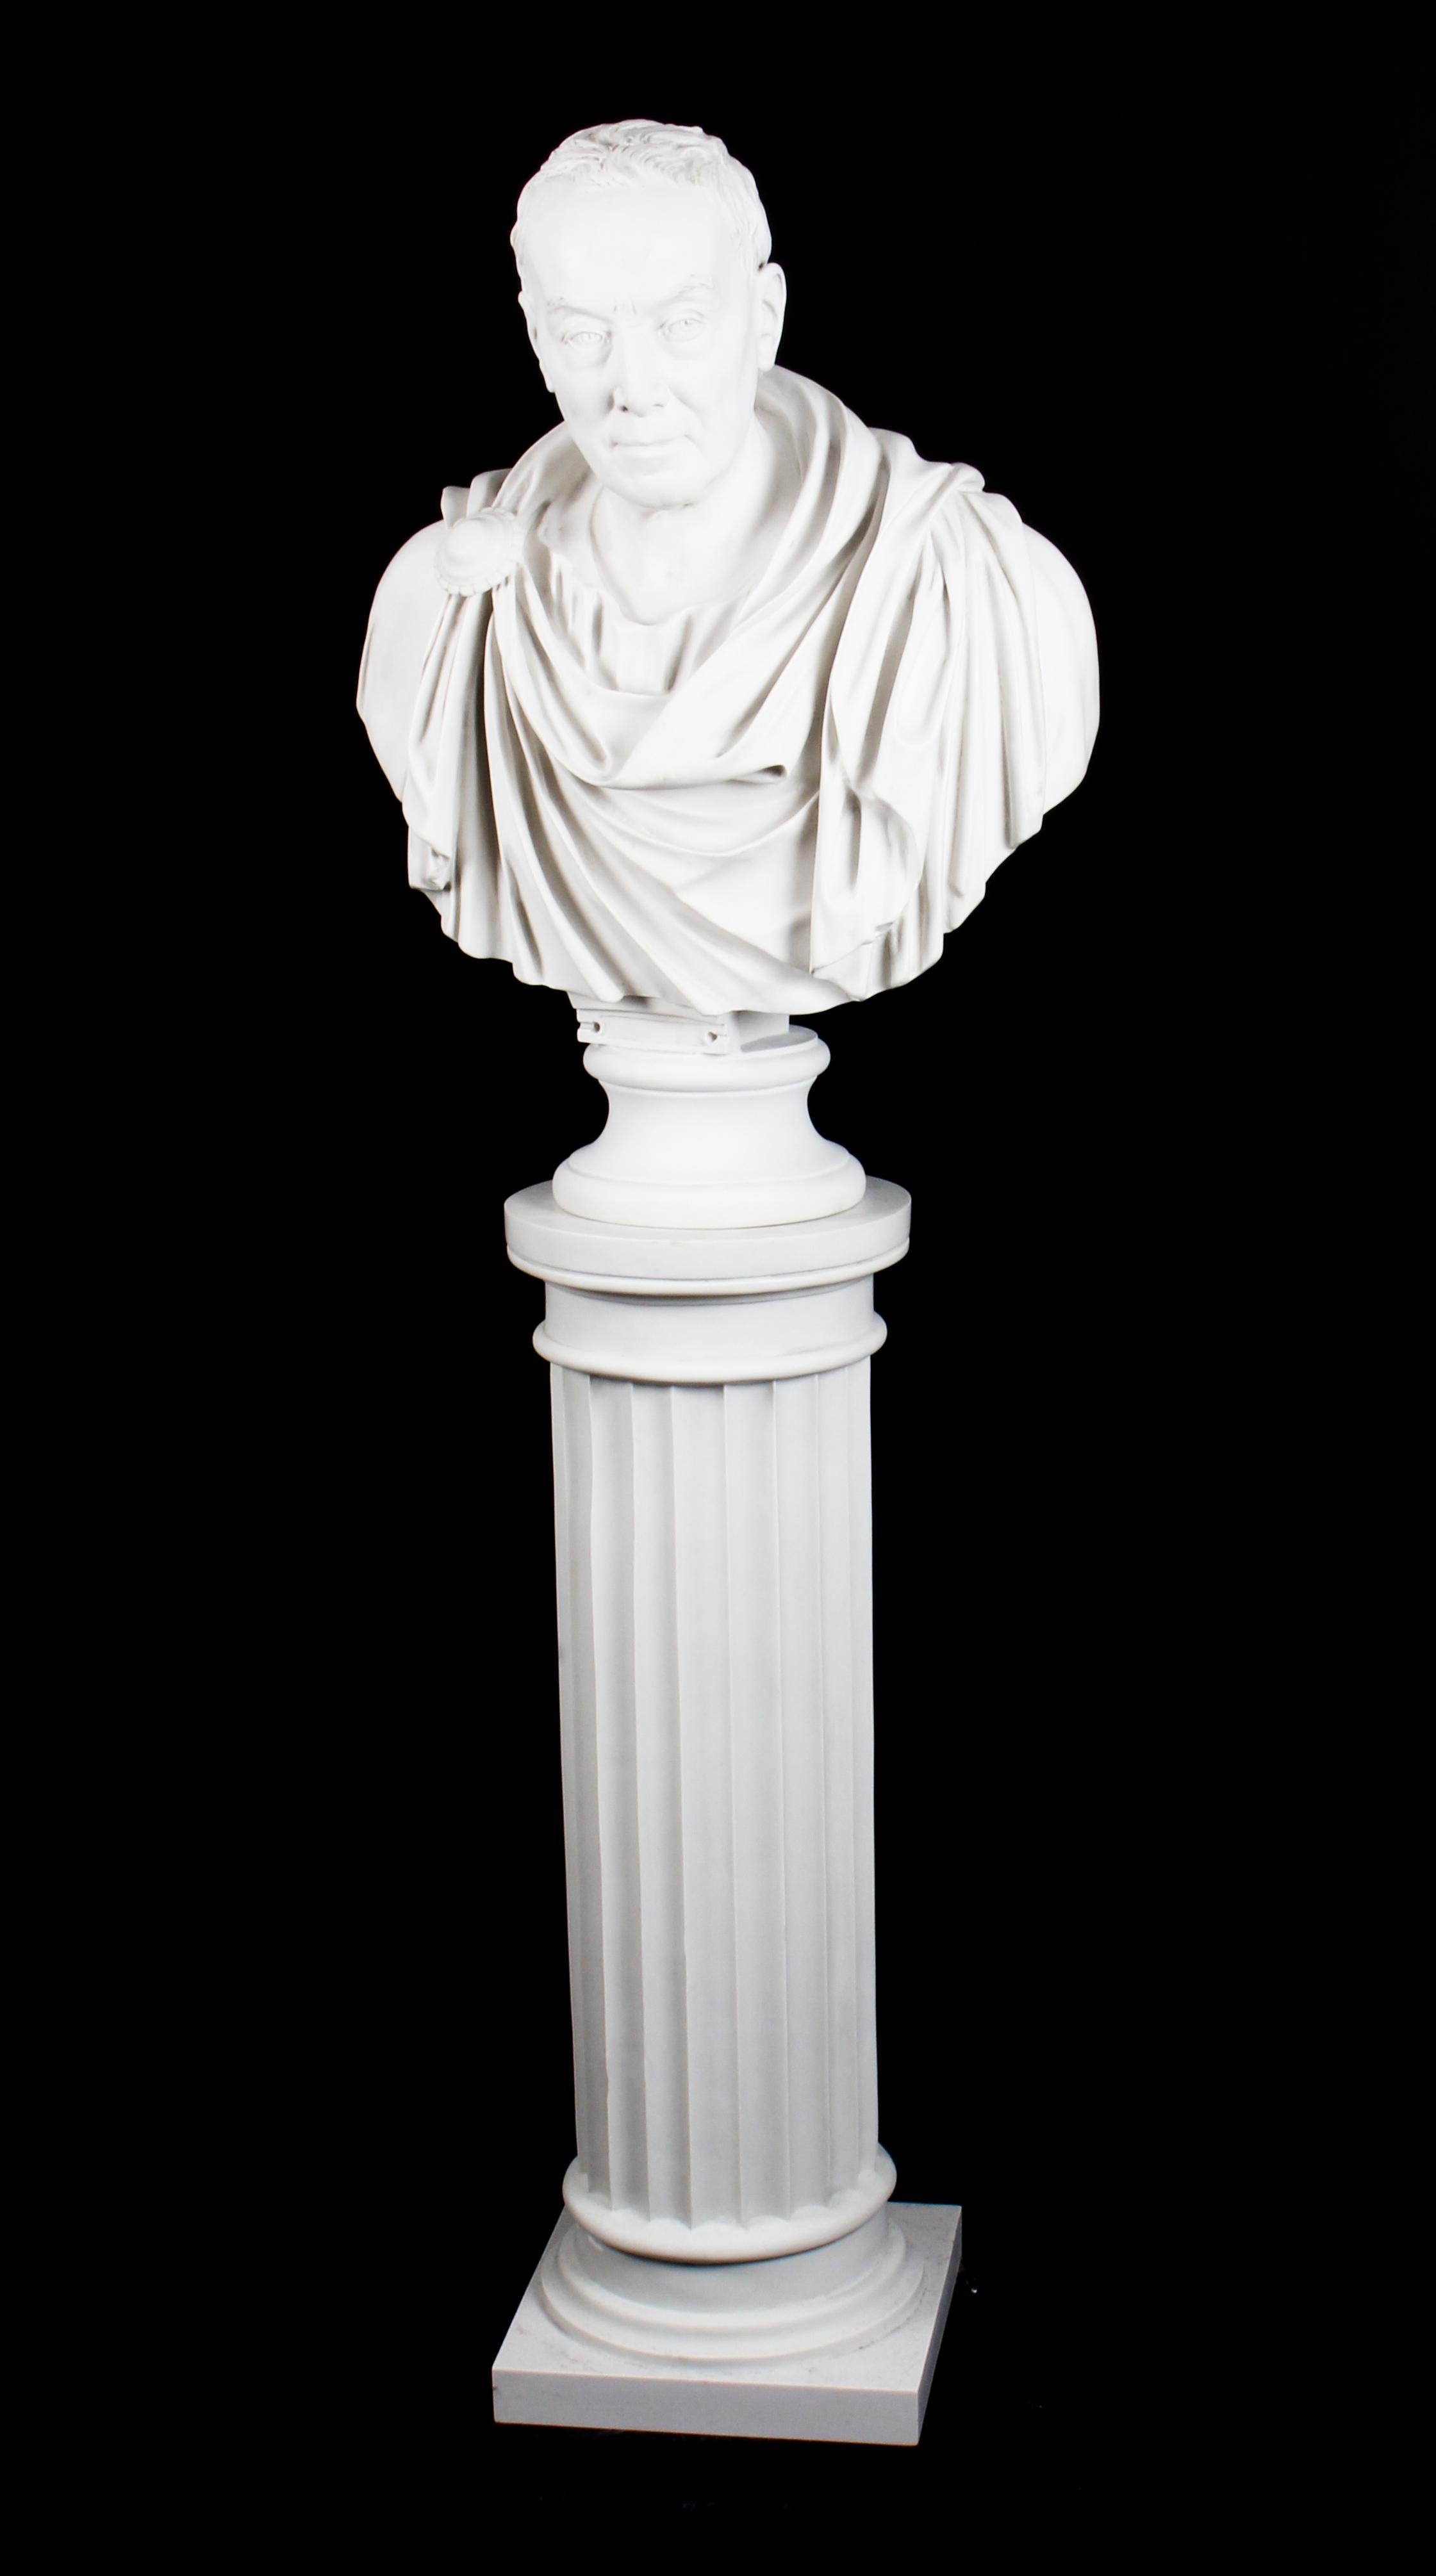 A beautifully sculpted vintage marble bust on pedestal of the famous Roman Statesman Julius Caesar dating from the last quarter of the 20th century. 

He is wearing a flowing toga with a fibulae or broach holding it in place, on a matching elegant